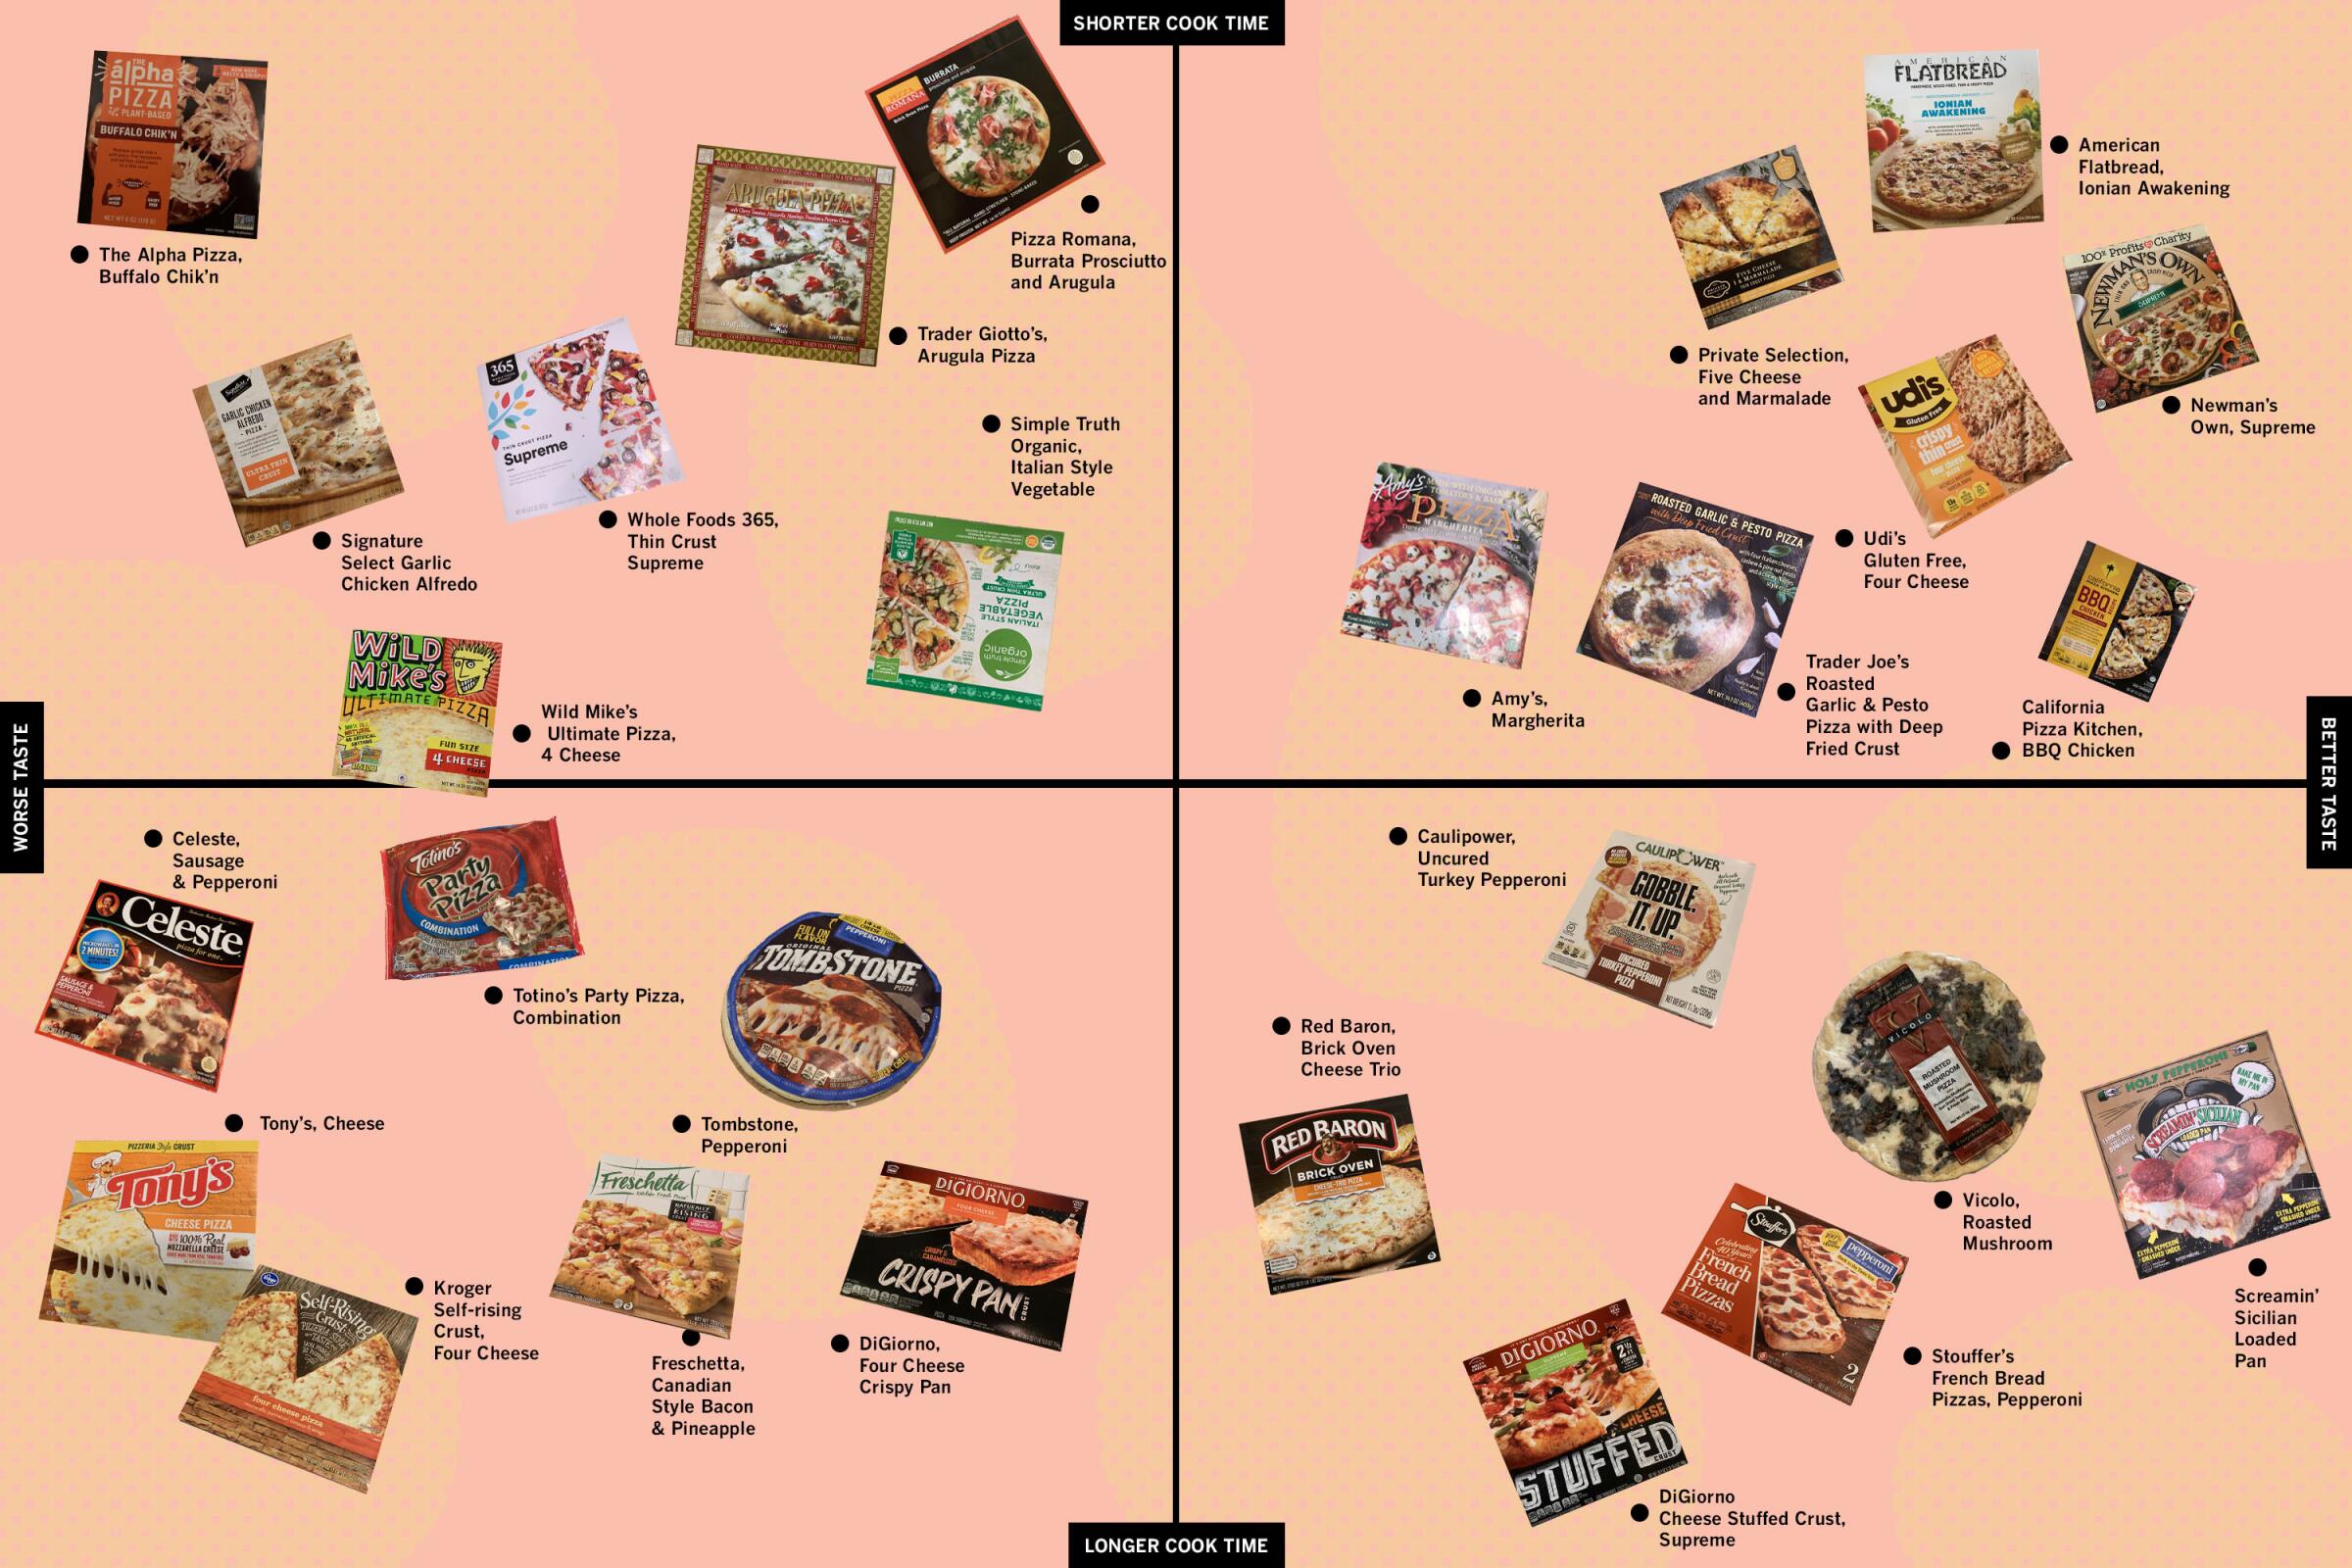 27 photos of different frozen pizzas on a chart with pink/orange background. X-axis of chart is taste; y-axis is cook time.